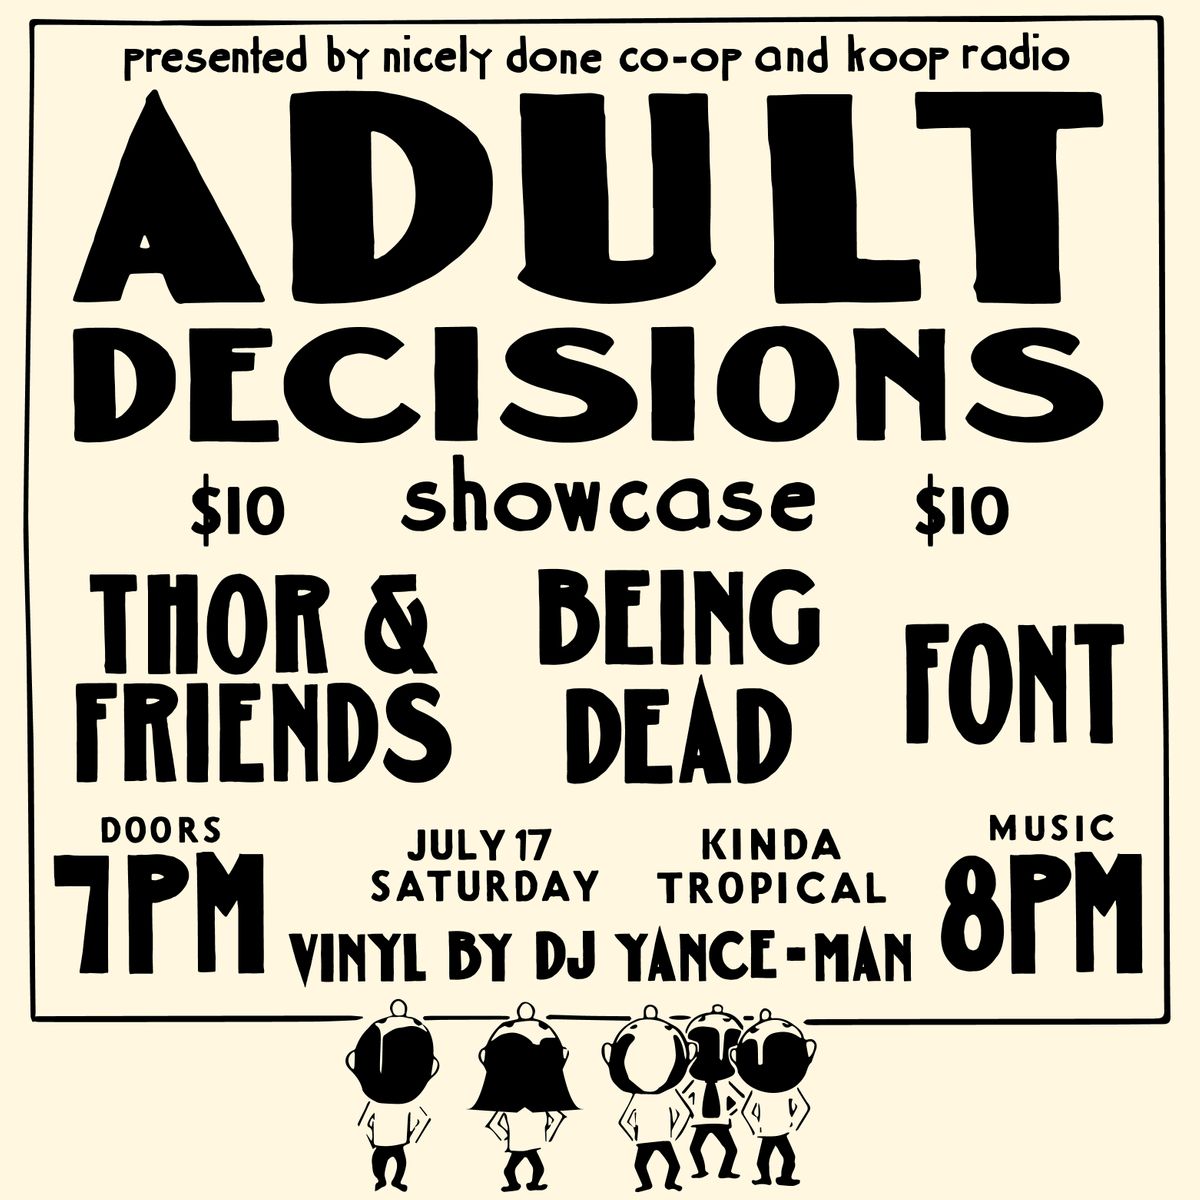 Adult Decisions Showcase with Thor & Friends, Being Dead, and Font